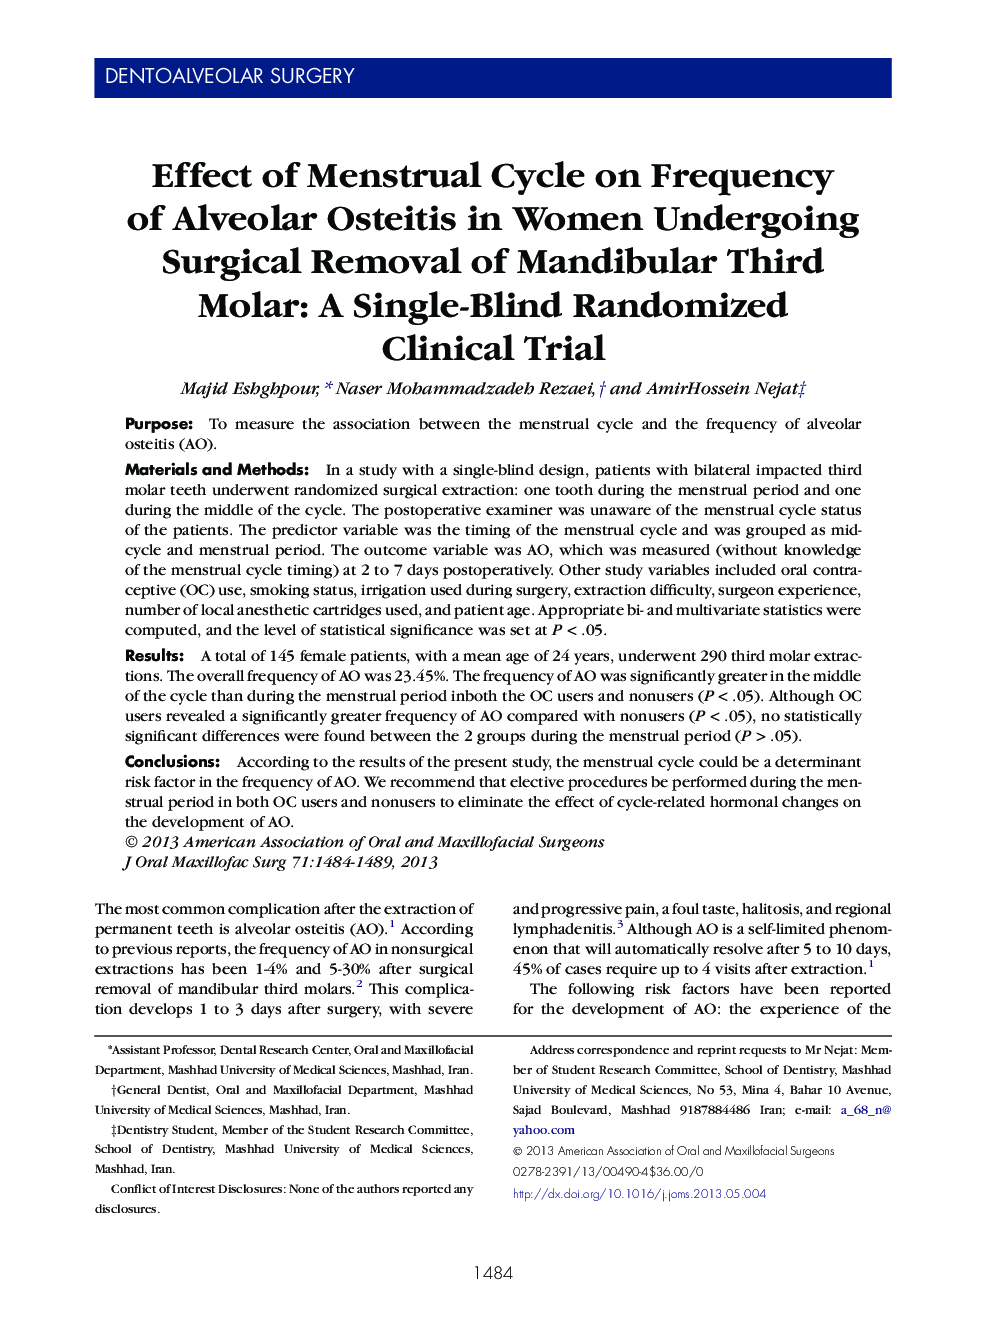 Effect of Menstrual Cycle on Frequency ofÂ Alveolar Osteitis in Women Undergoing Surgical Removal of Mandibular Third Molar: A Single-Blind Randomized Clinical Trial